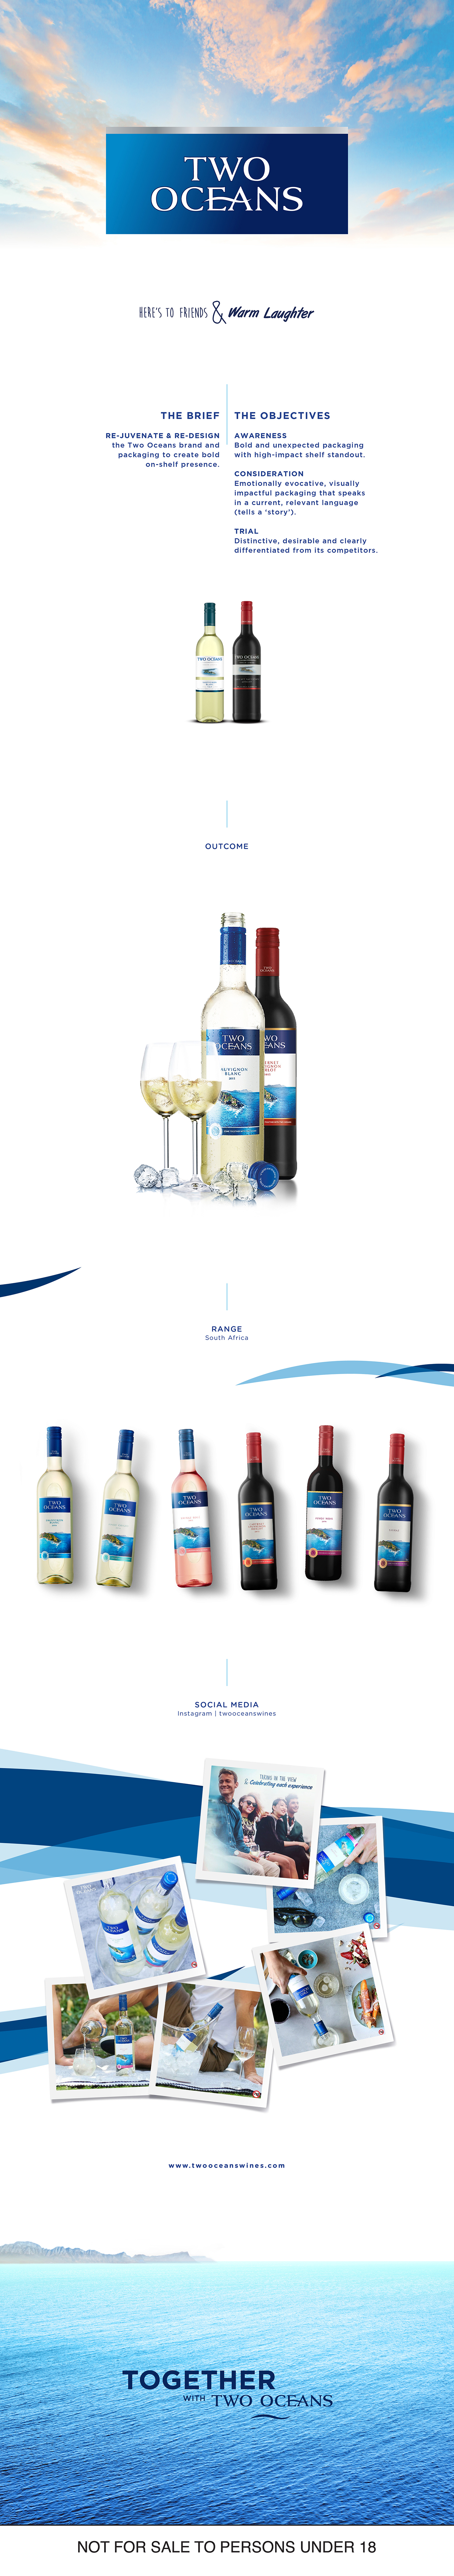 graphic design  Packaging wine two oceans south africa Wines design